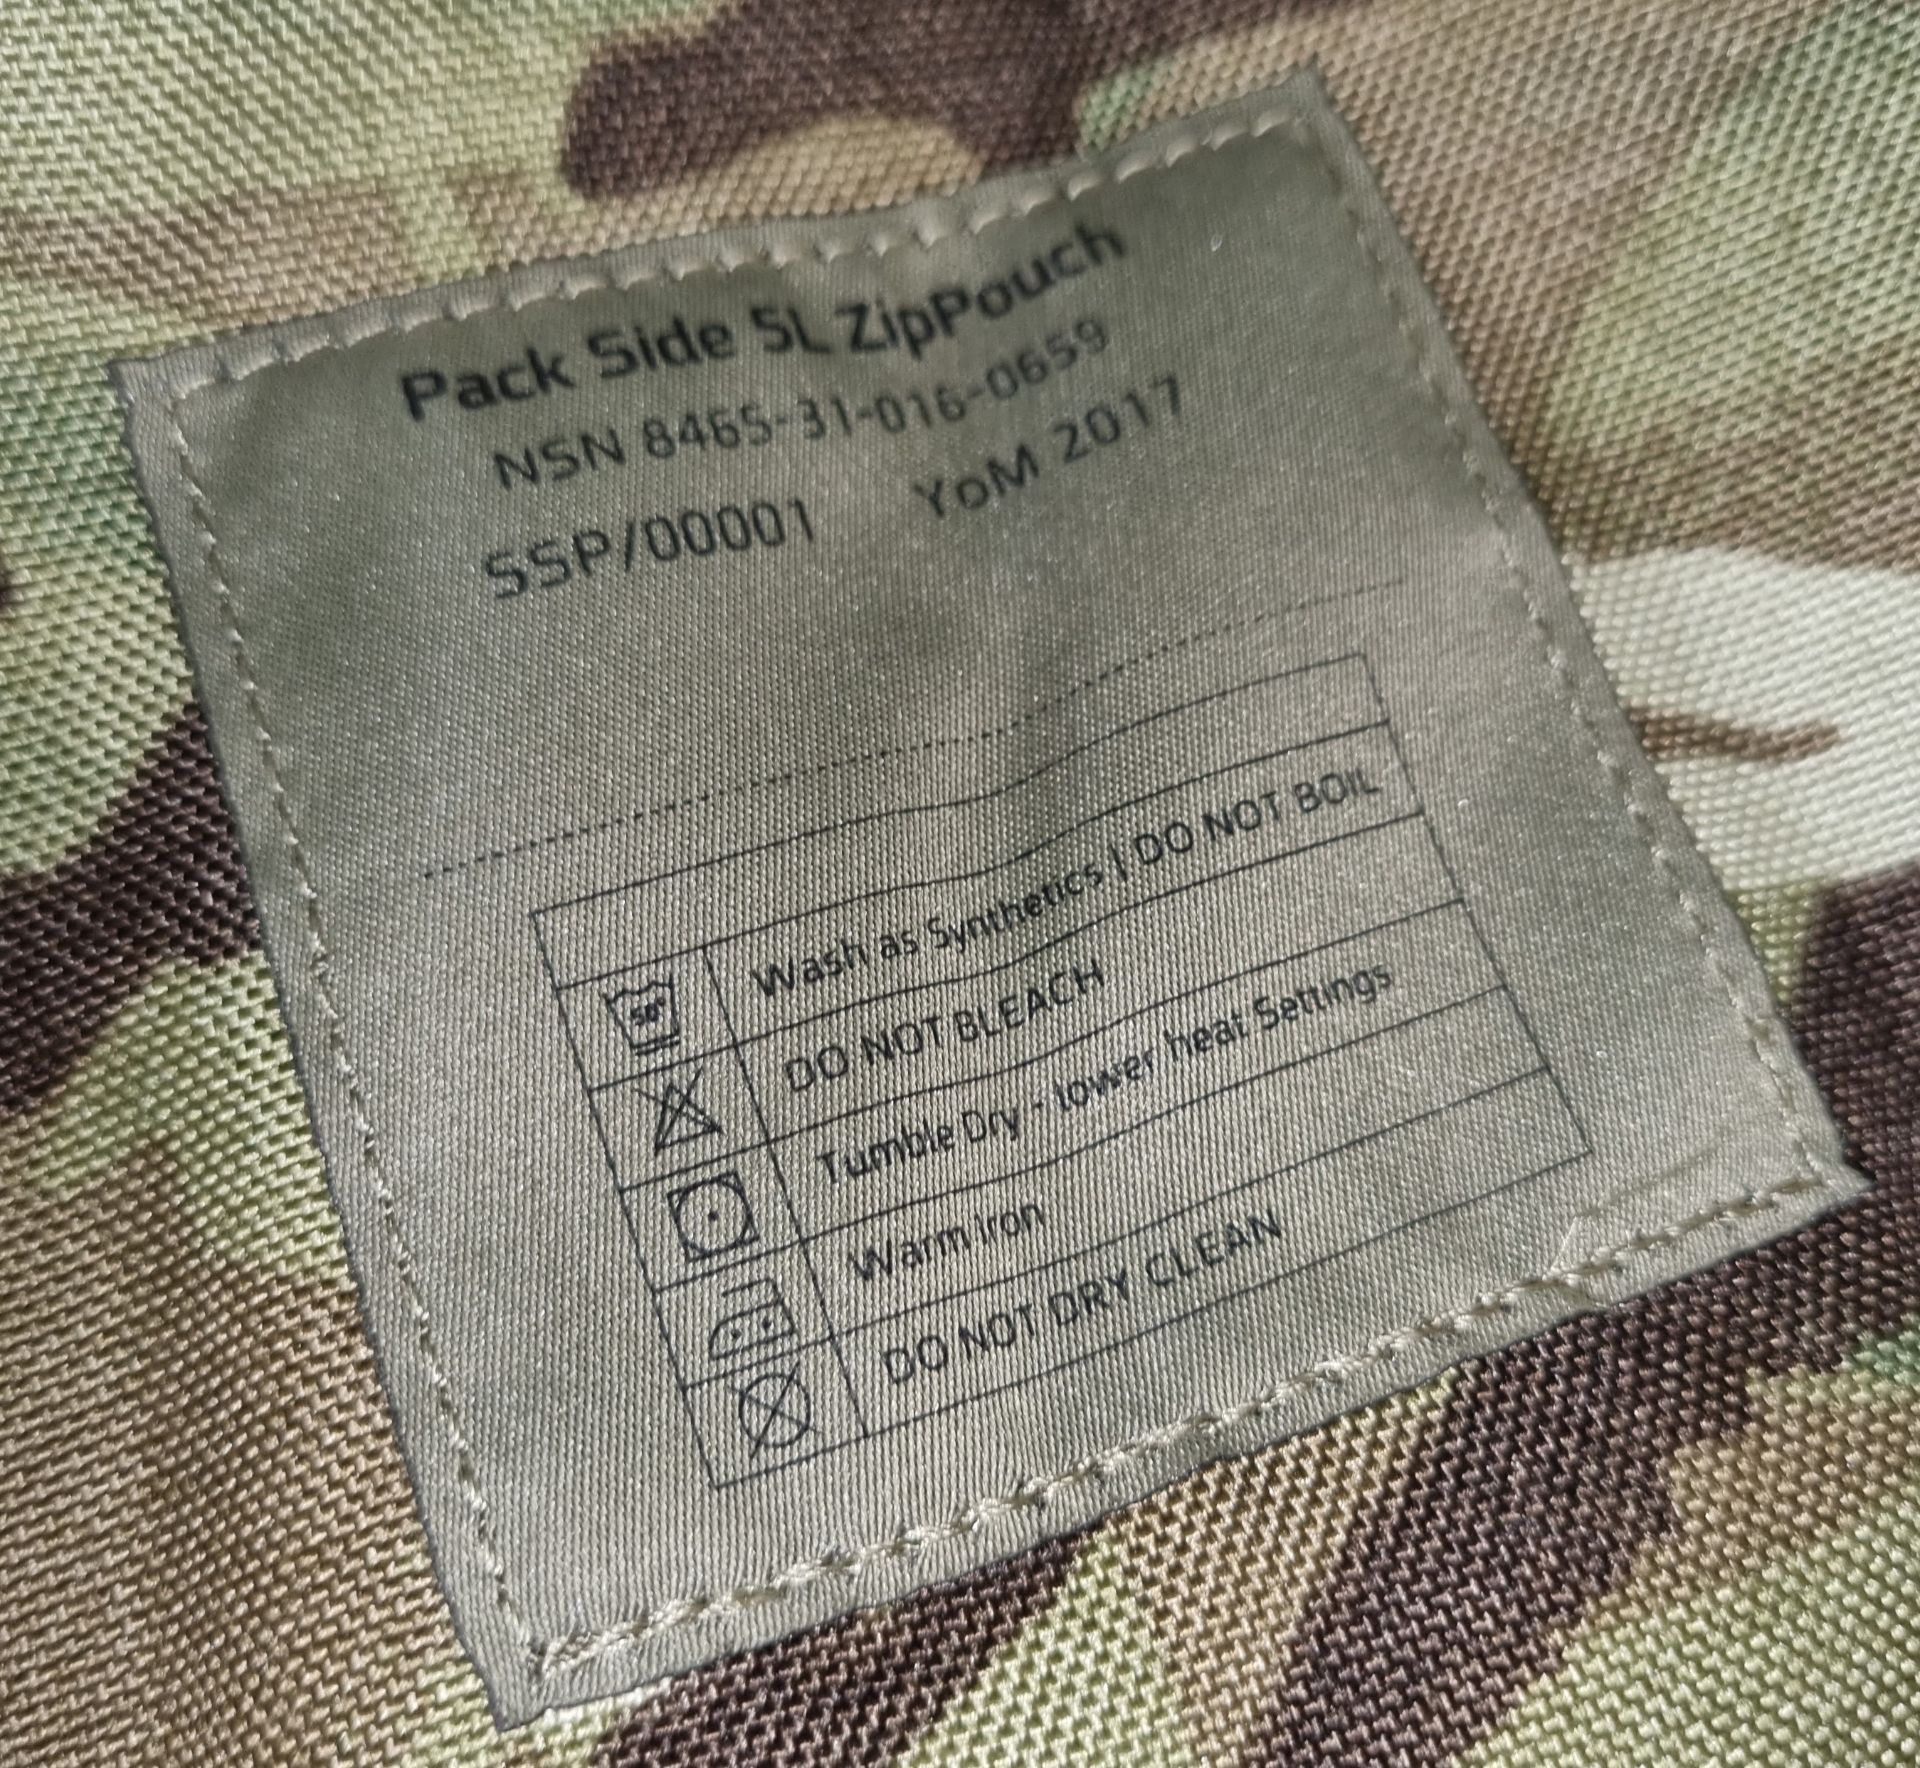 56x British Army MTP pouches - mixed types - mixed sizes - mixed grades - Image 11 of 12